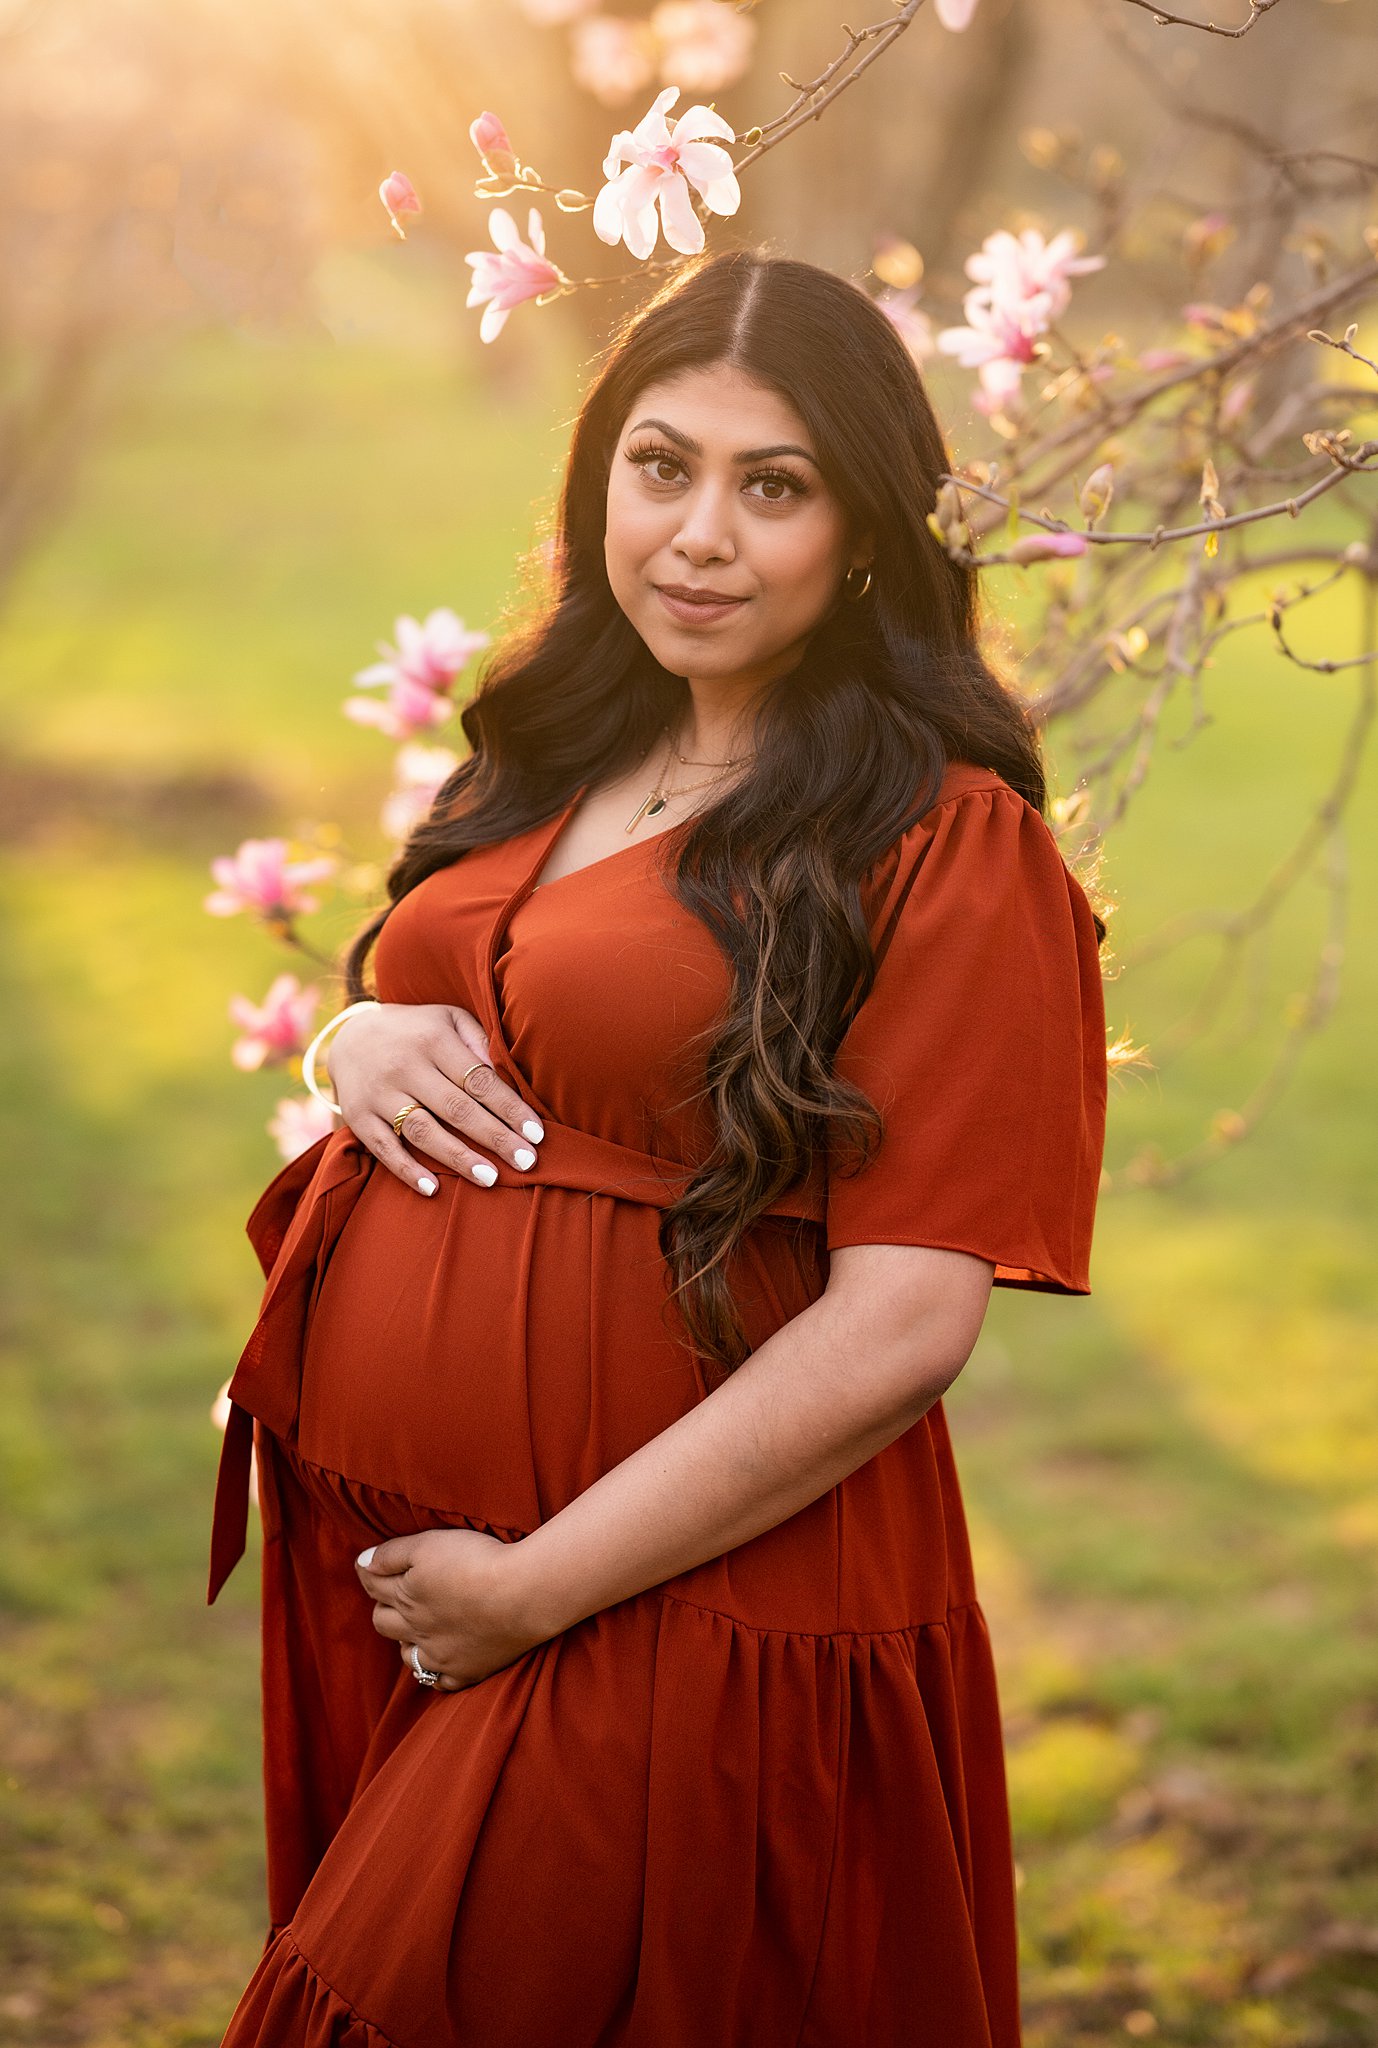 A mother to be holds her bump while standing under a tree blooming pink flowers